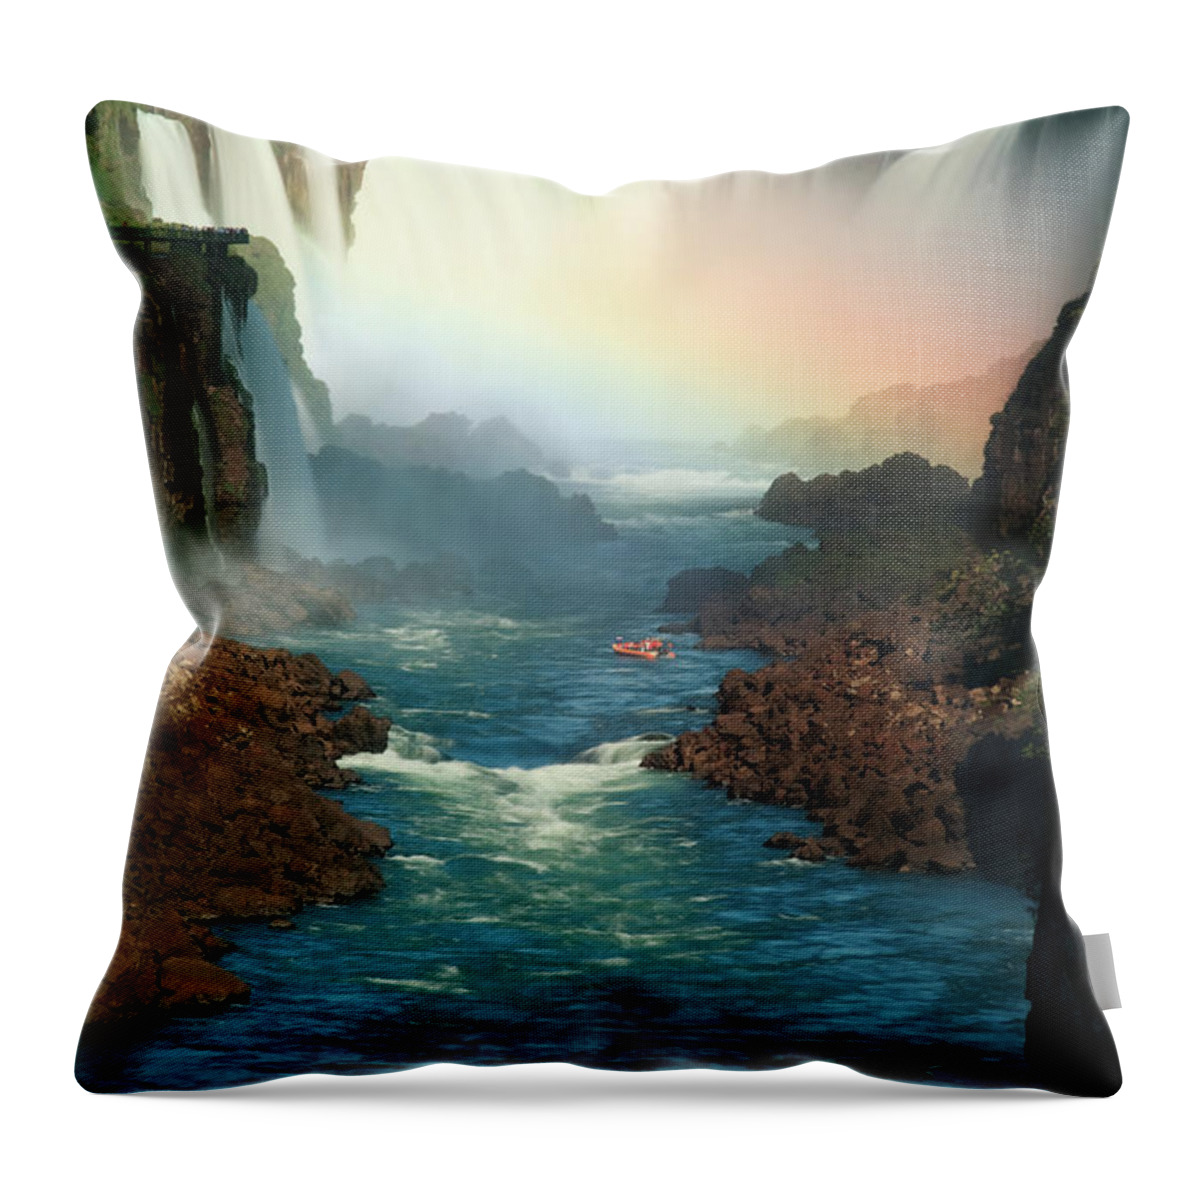 Tropical Rainforest Throw Pillow featuring the photograph Iguazu River Falls by Gcoles